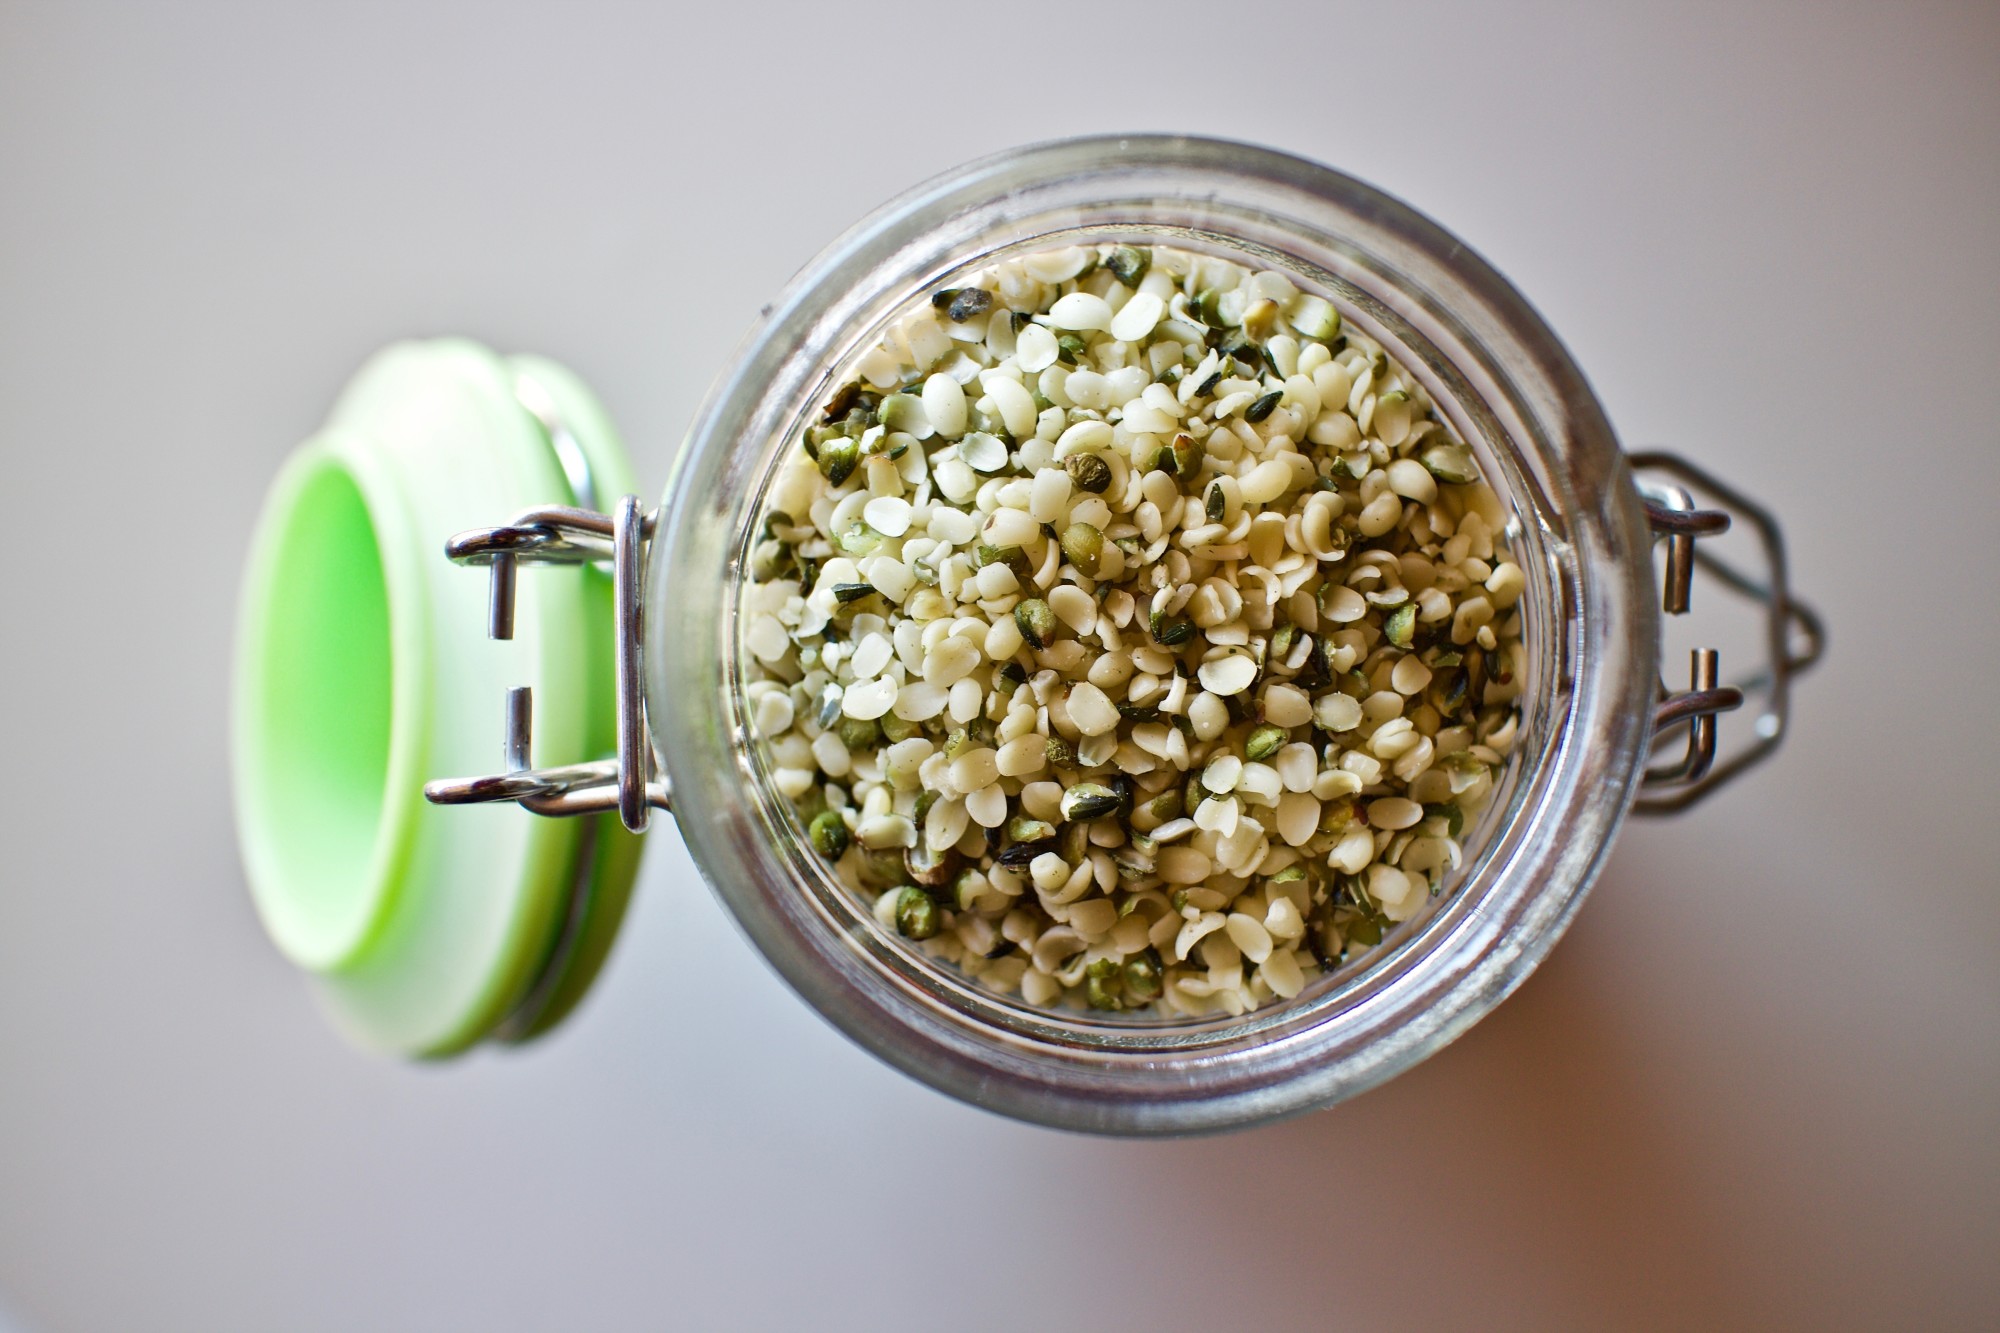 7 Seriously Good Hemp Seeds Benefits and Nutritional Facts